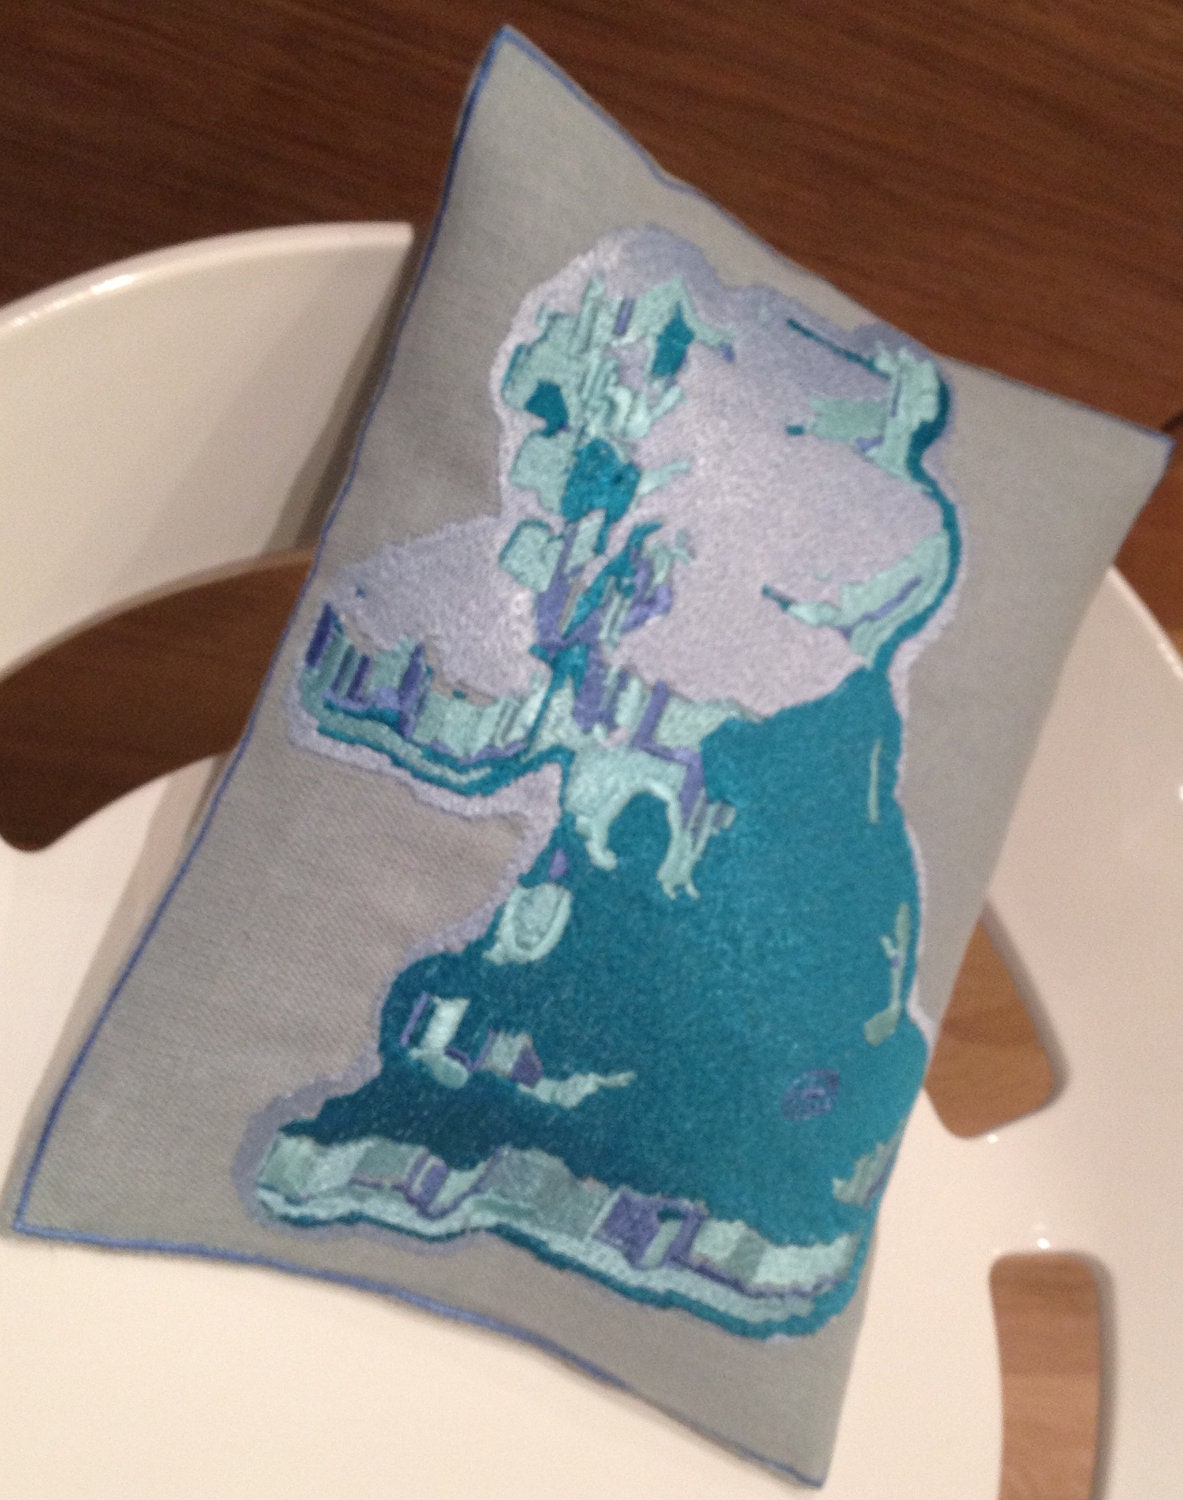 United Kingdom, Uk Abstract Embroidery Teal Throw Pillow